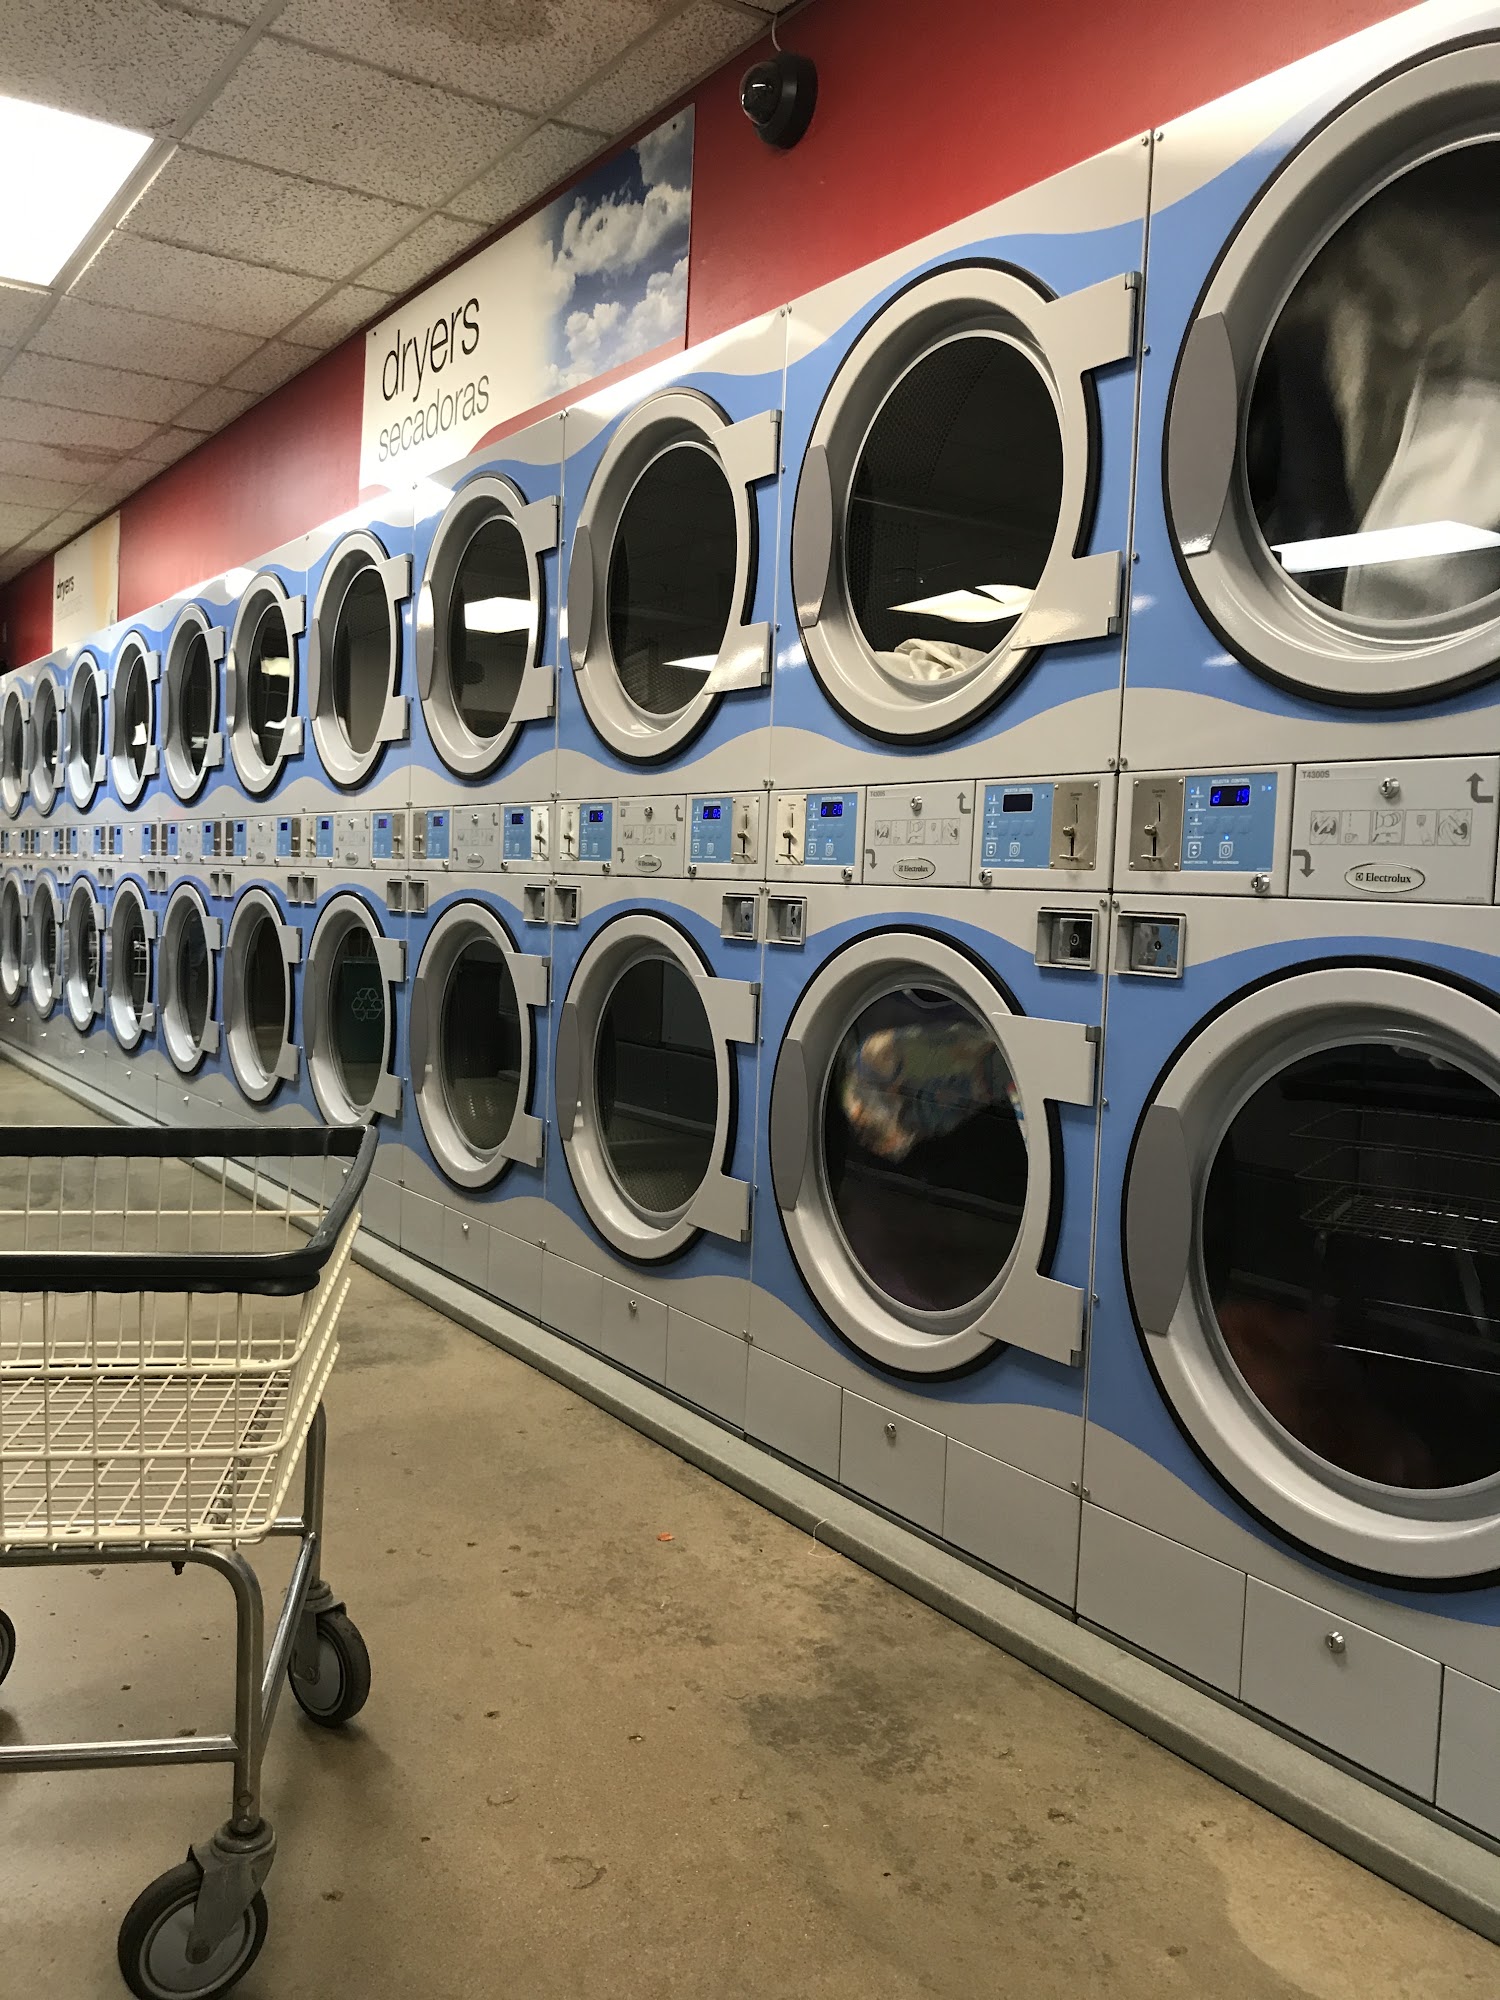 Colonial Laundry-Dry Cleaners 1653 Humiston Ave, Worthington Minnesota 56187